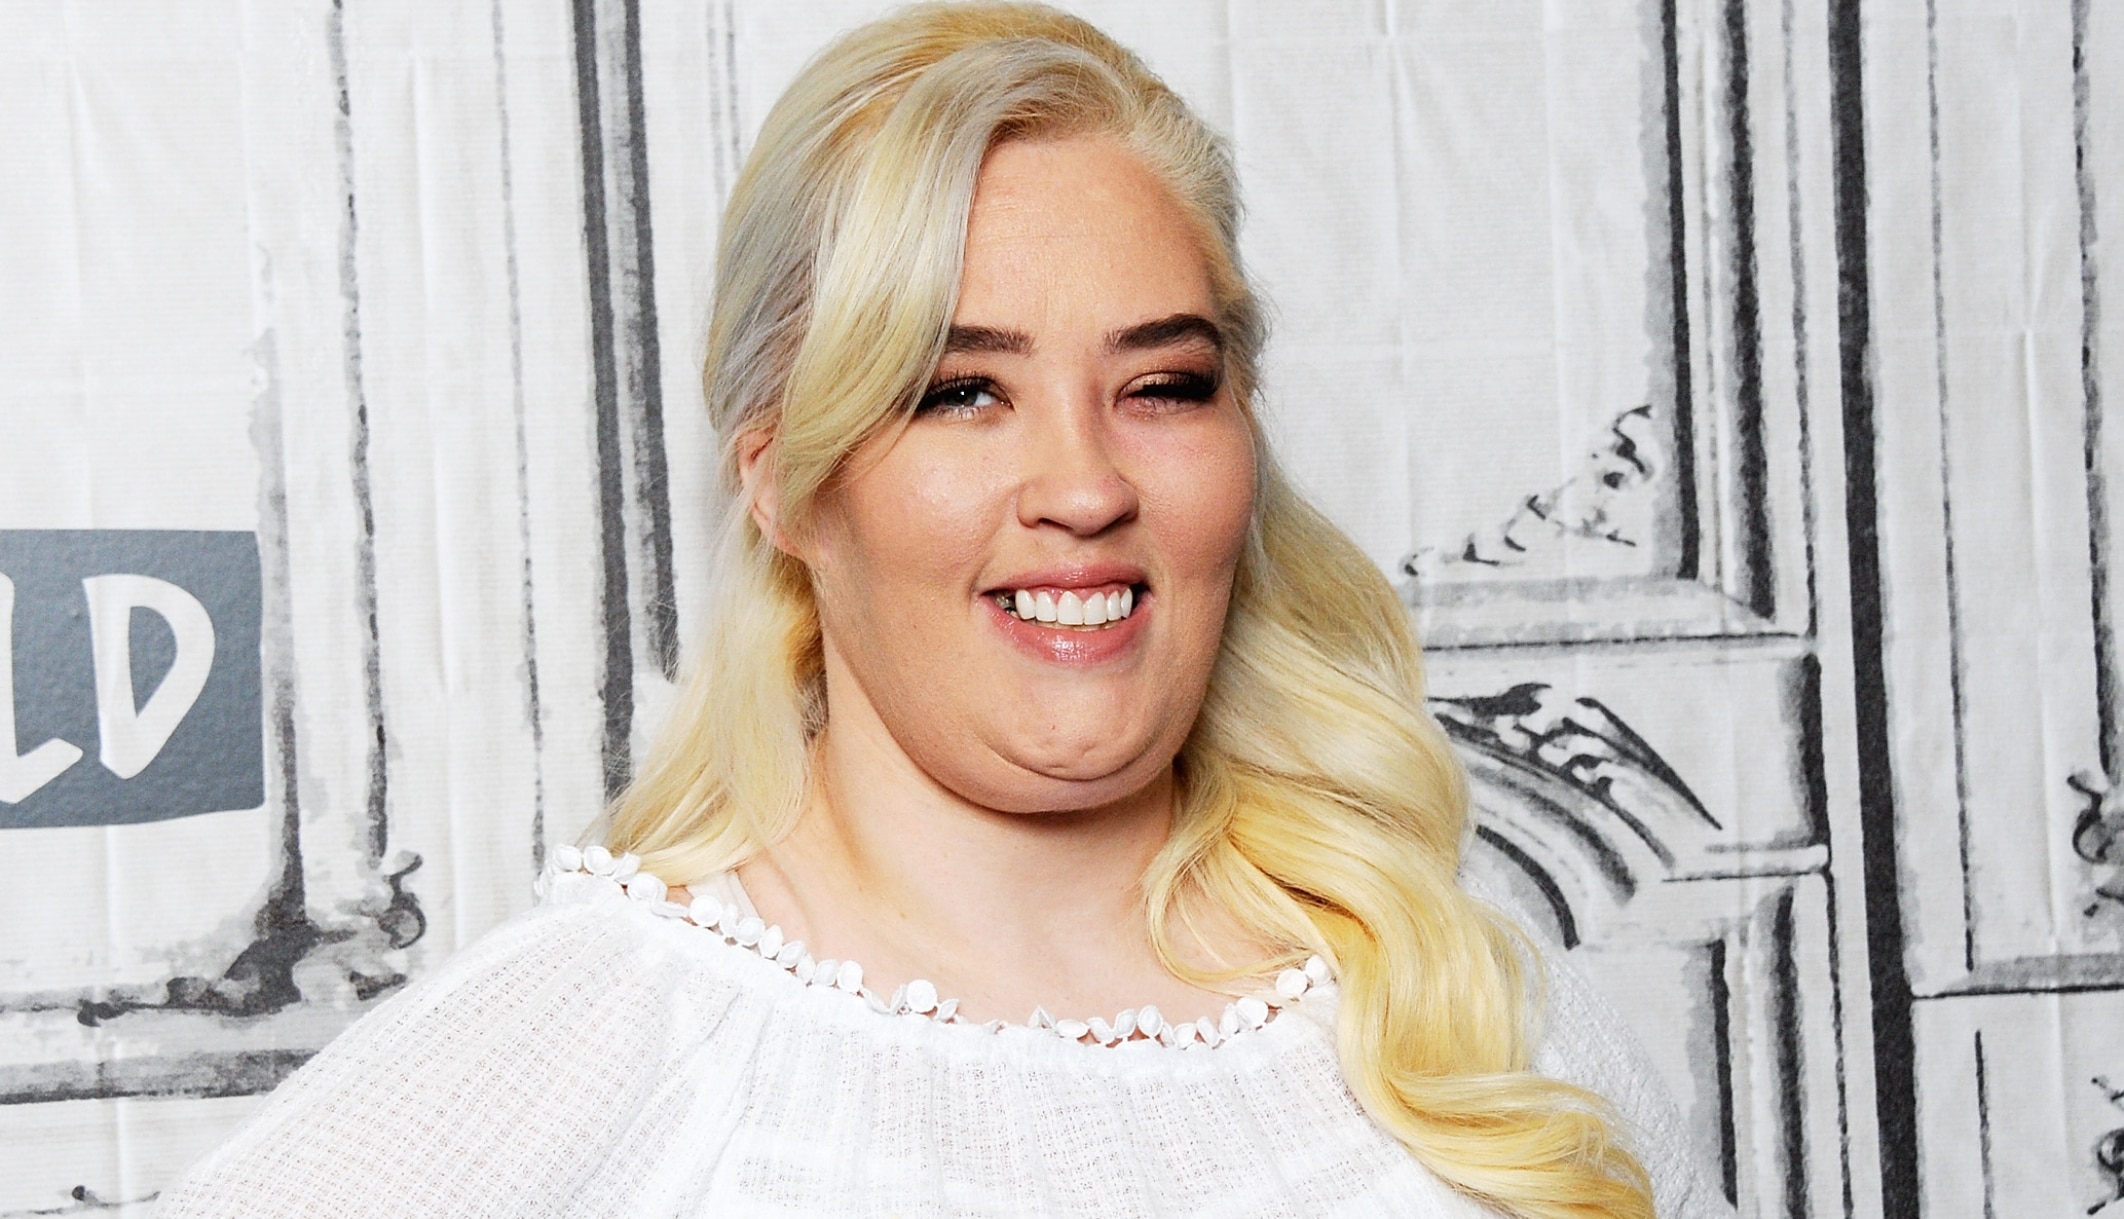 Reality TV star Mama June seen here attending an NYC event in June 2018